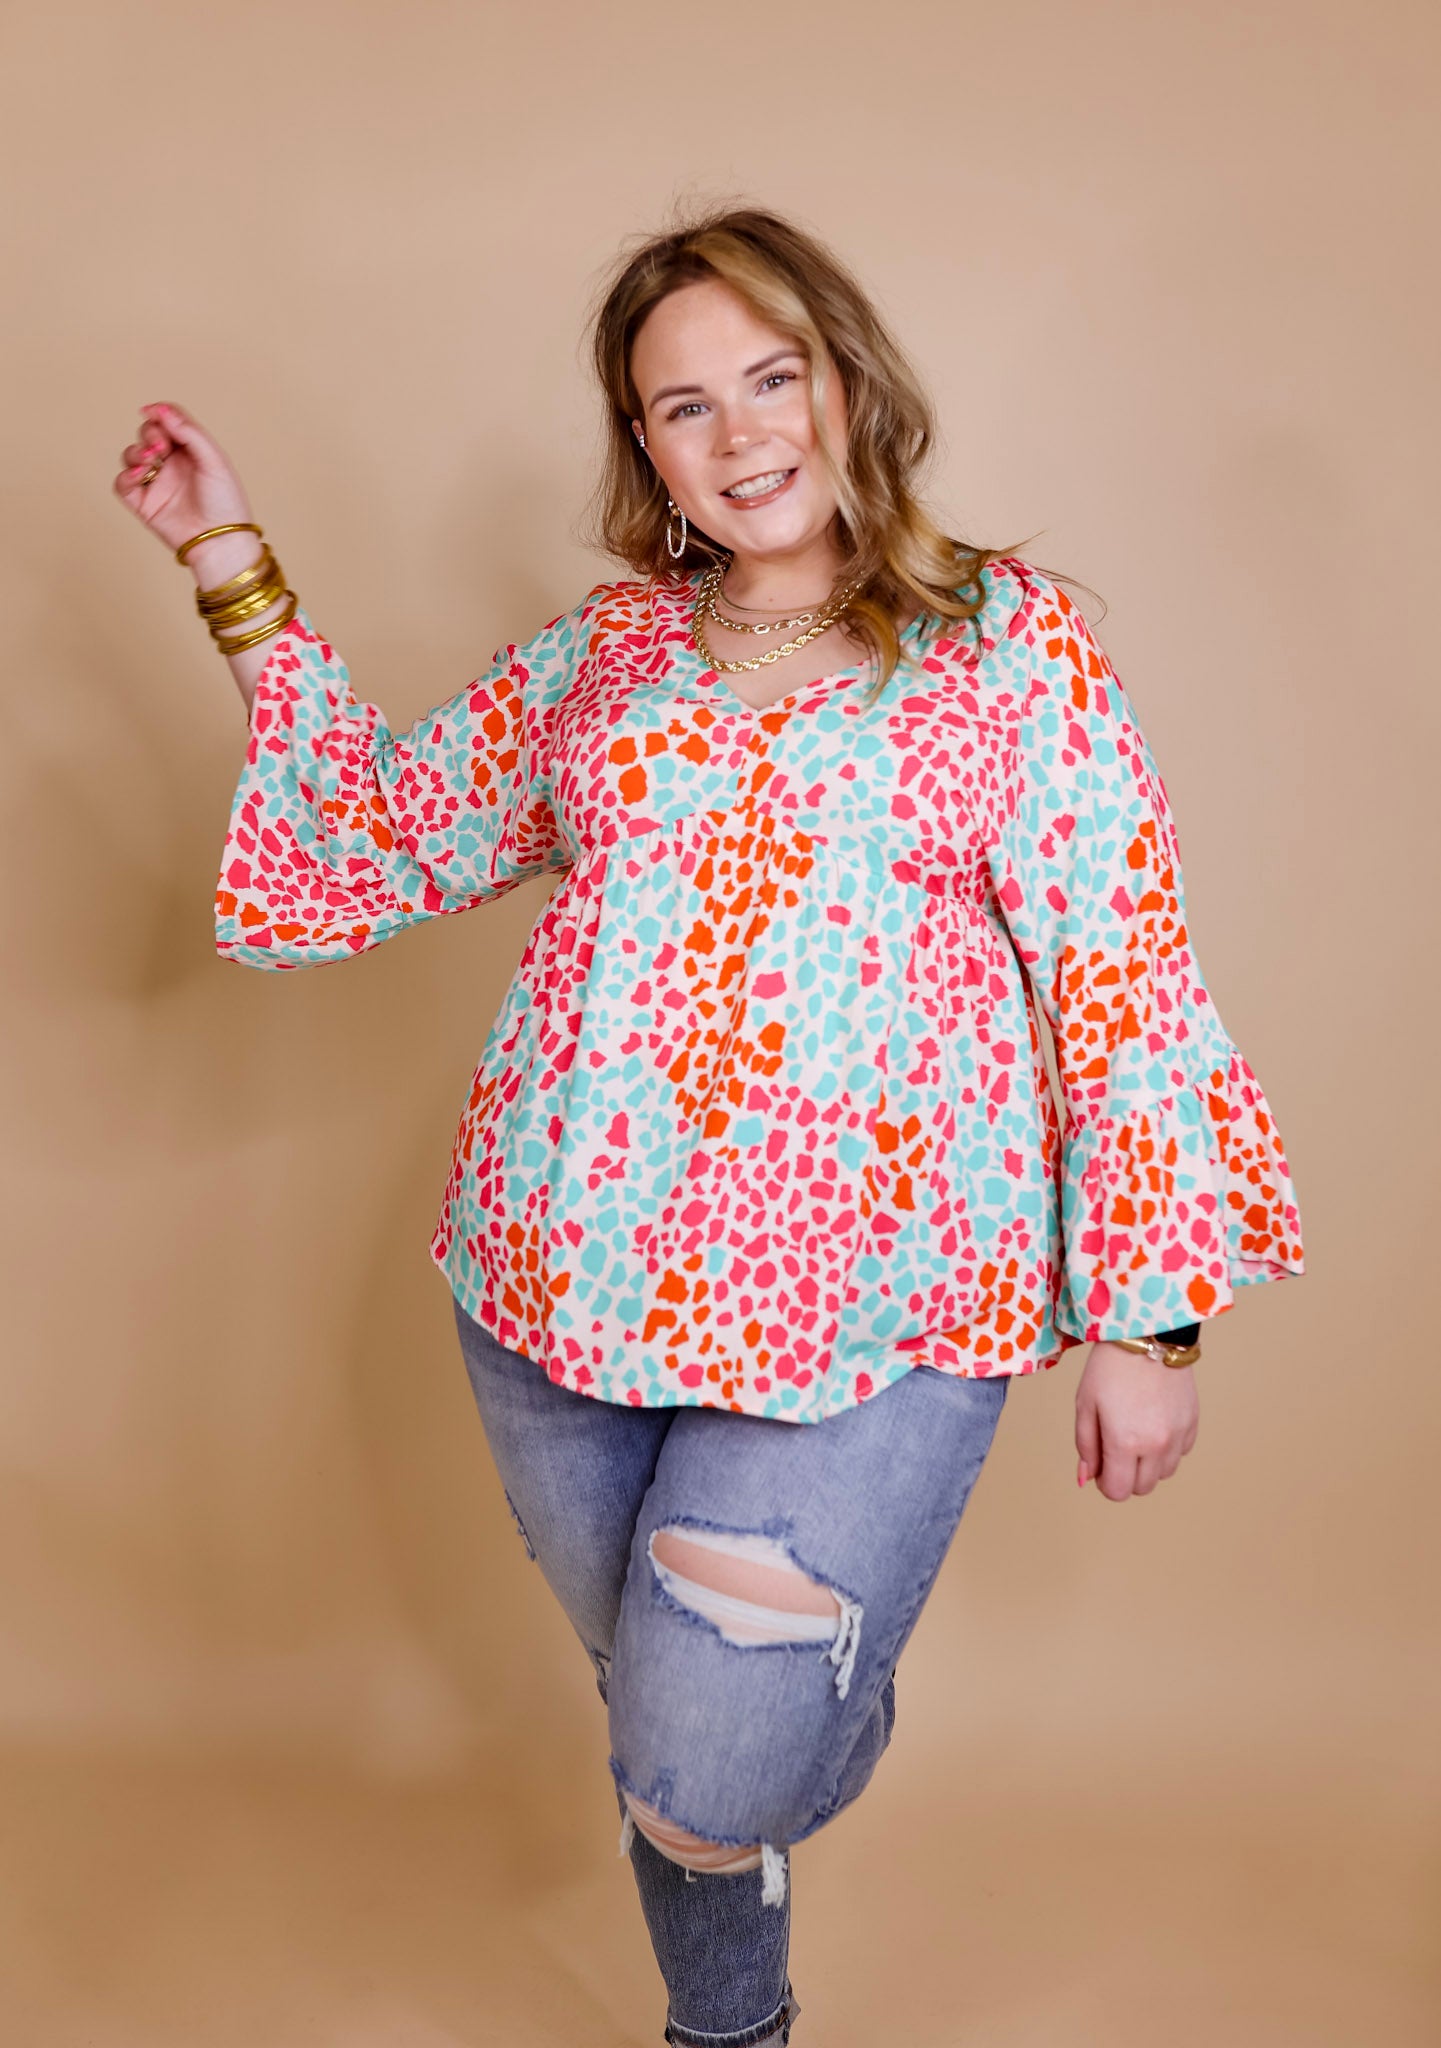 Feeling Ideal Multi Color Dotted Babydoll Top with Ruffle 3/4 Sleeves in Ivory - Giddy Up Glamour Boutique